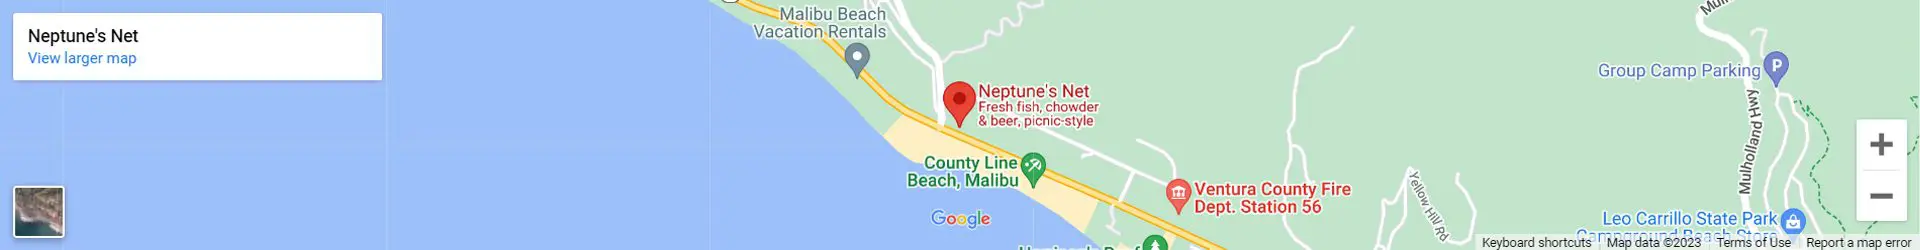 A map of neptune 's new location on the beach.